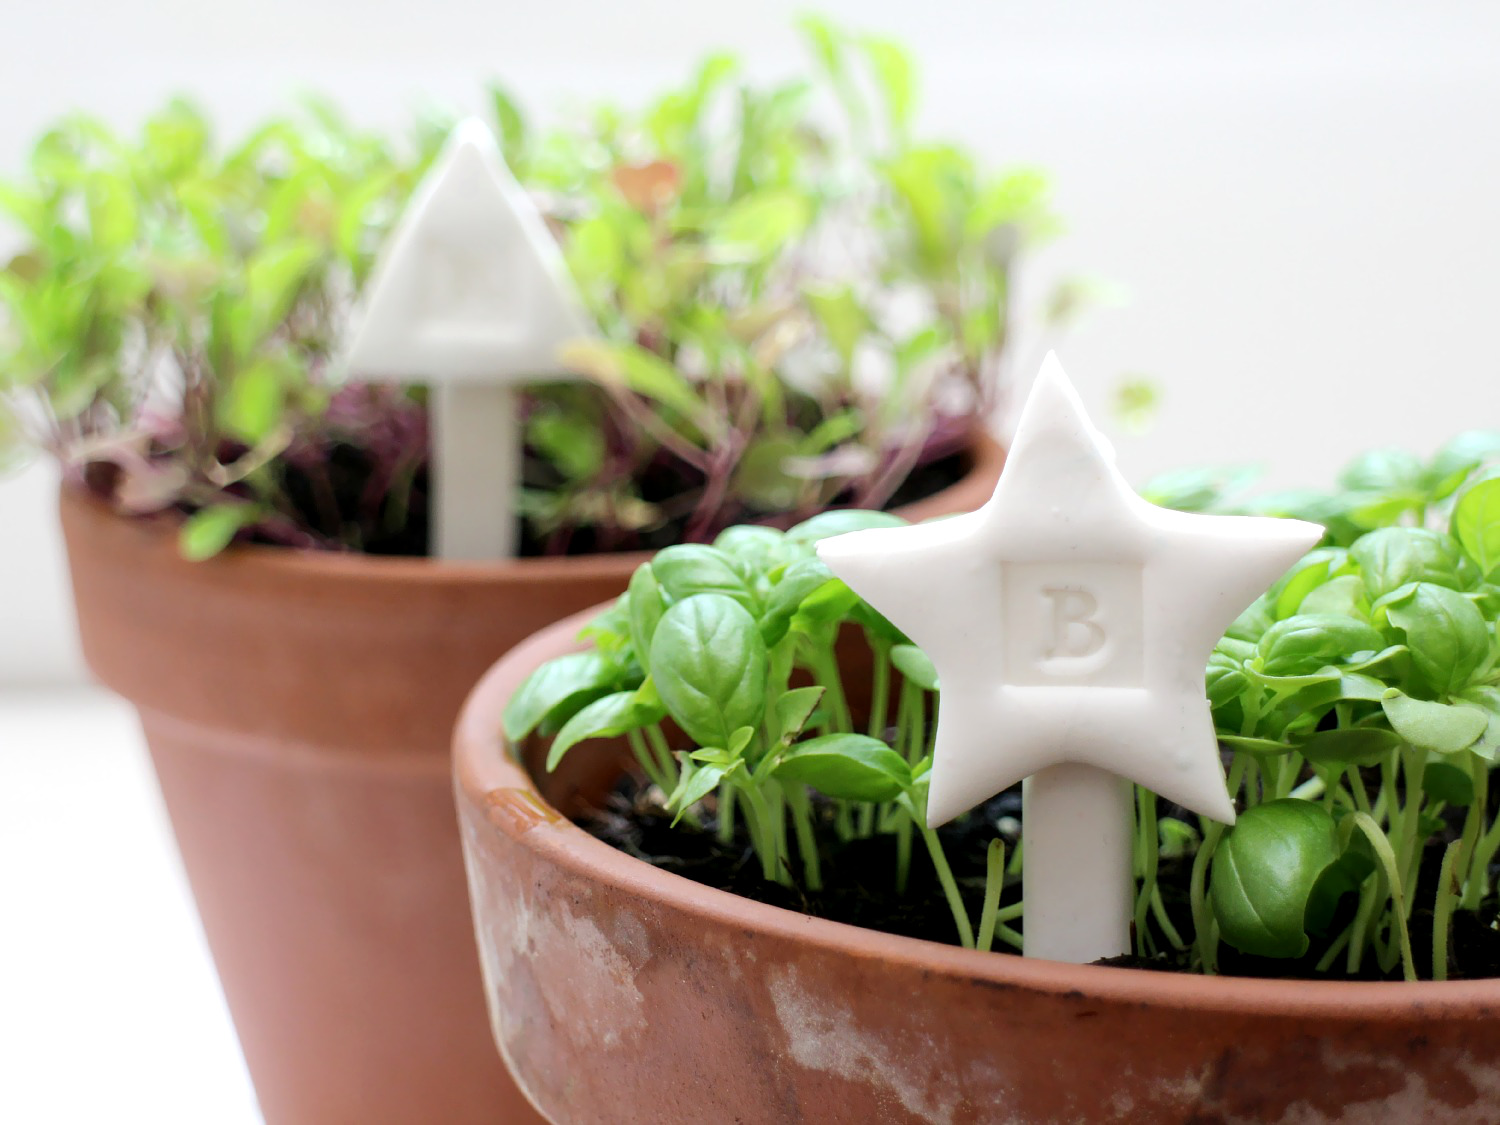 FIMO plant markers for basil